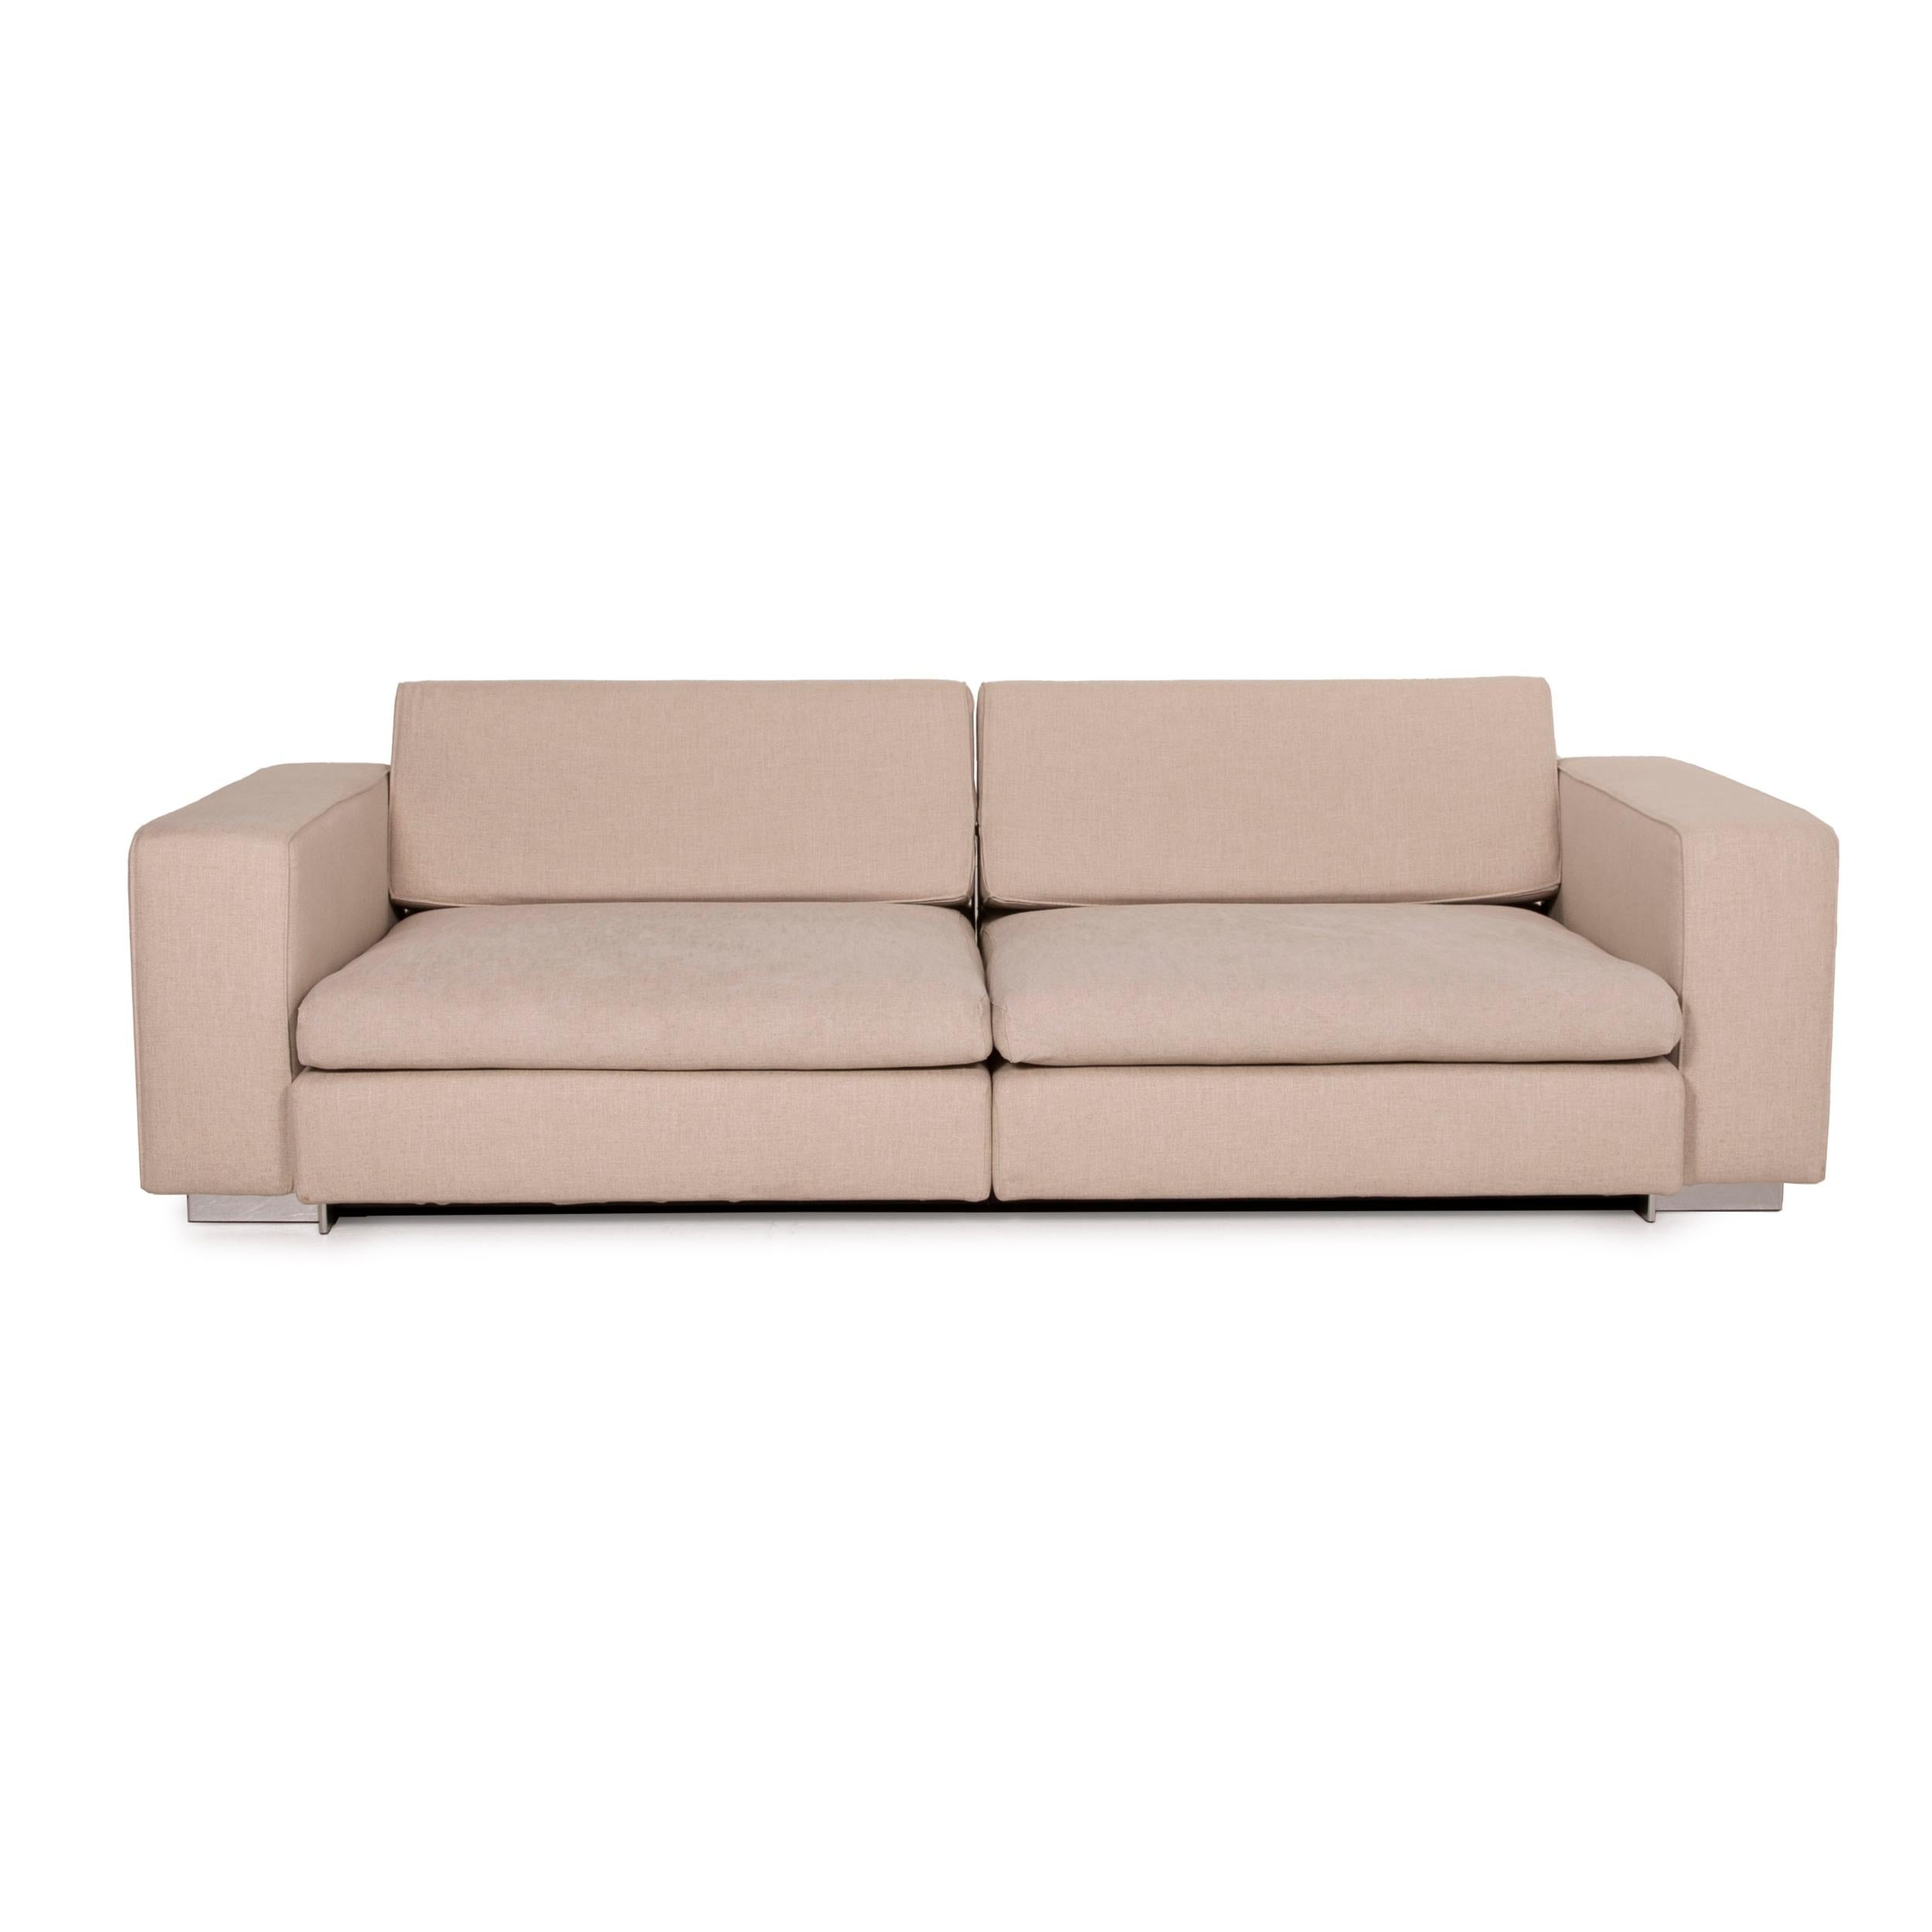 Molteni Turner Fabric Sofa Set Beige 1 Three-Seater 1 Two-Seater Function In Fair Condition For Sale In Cologne, DE